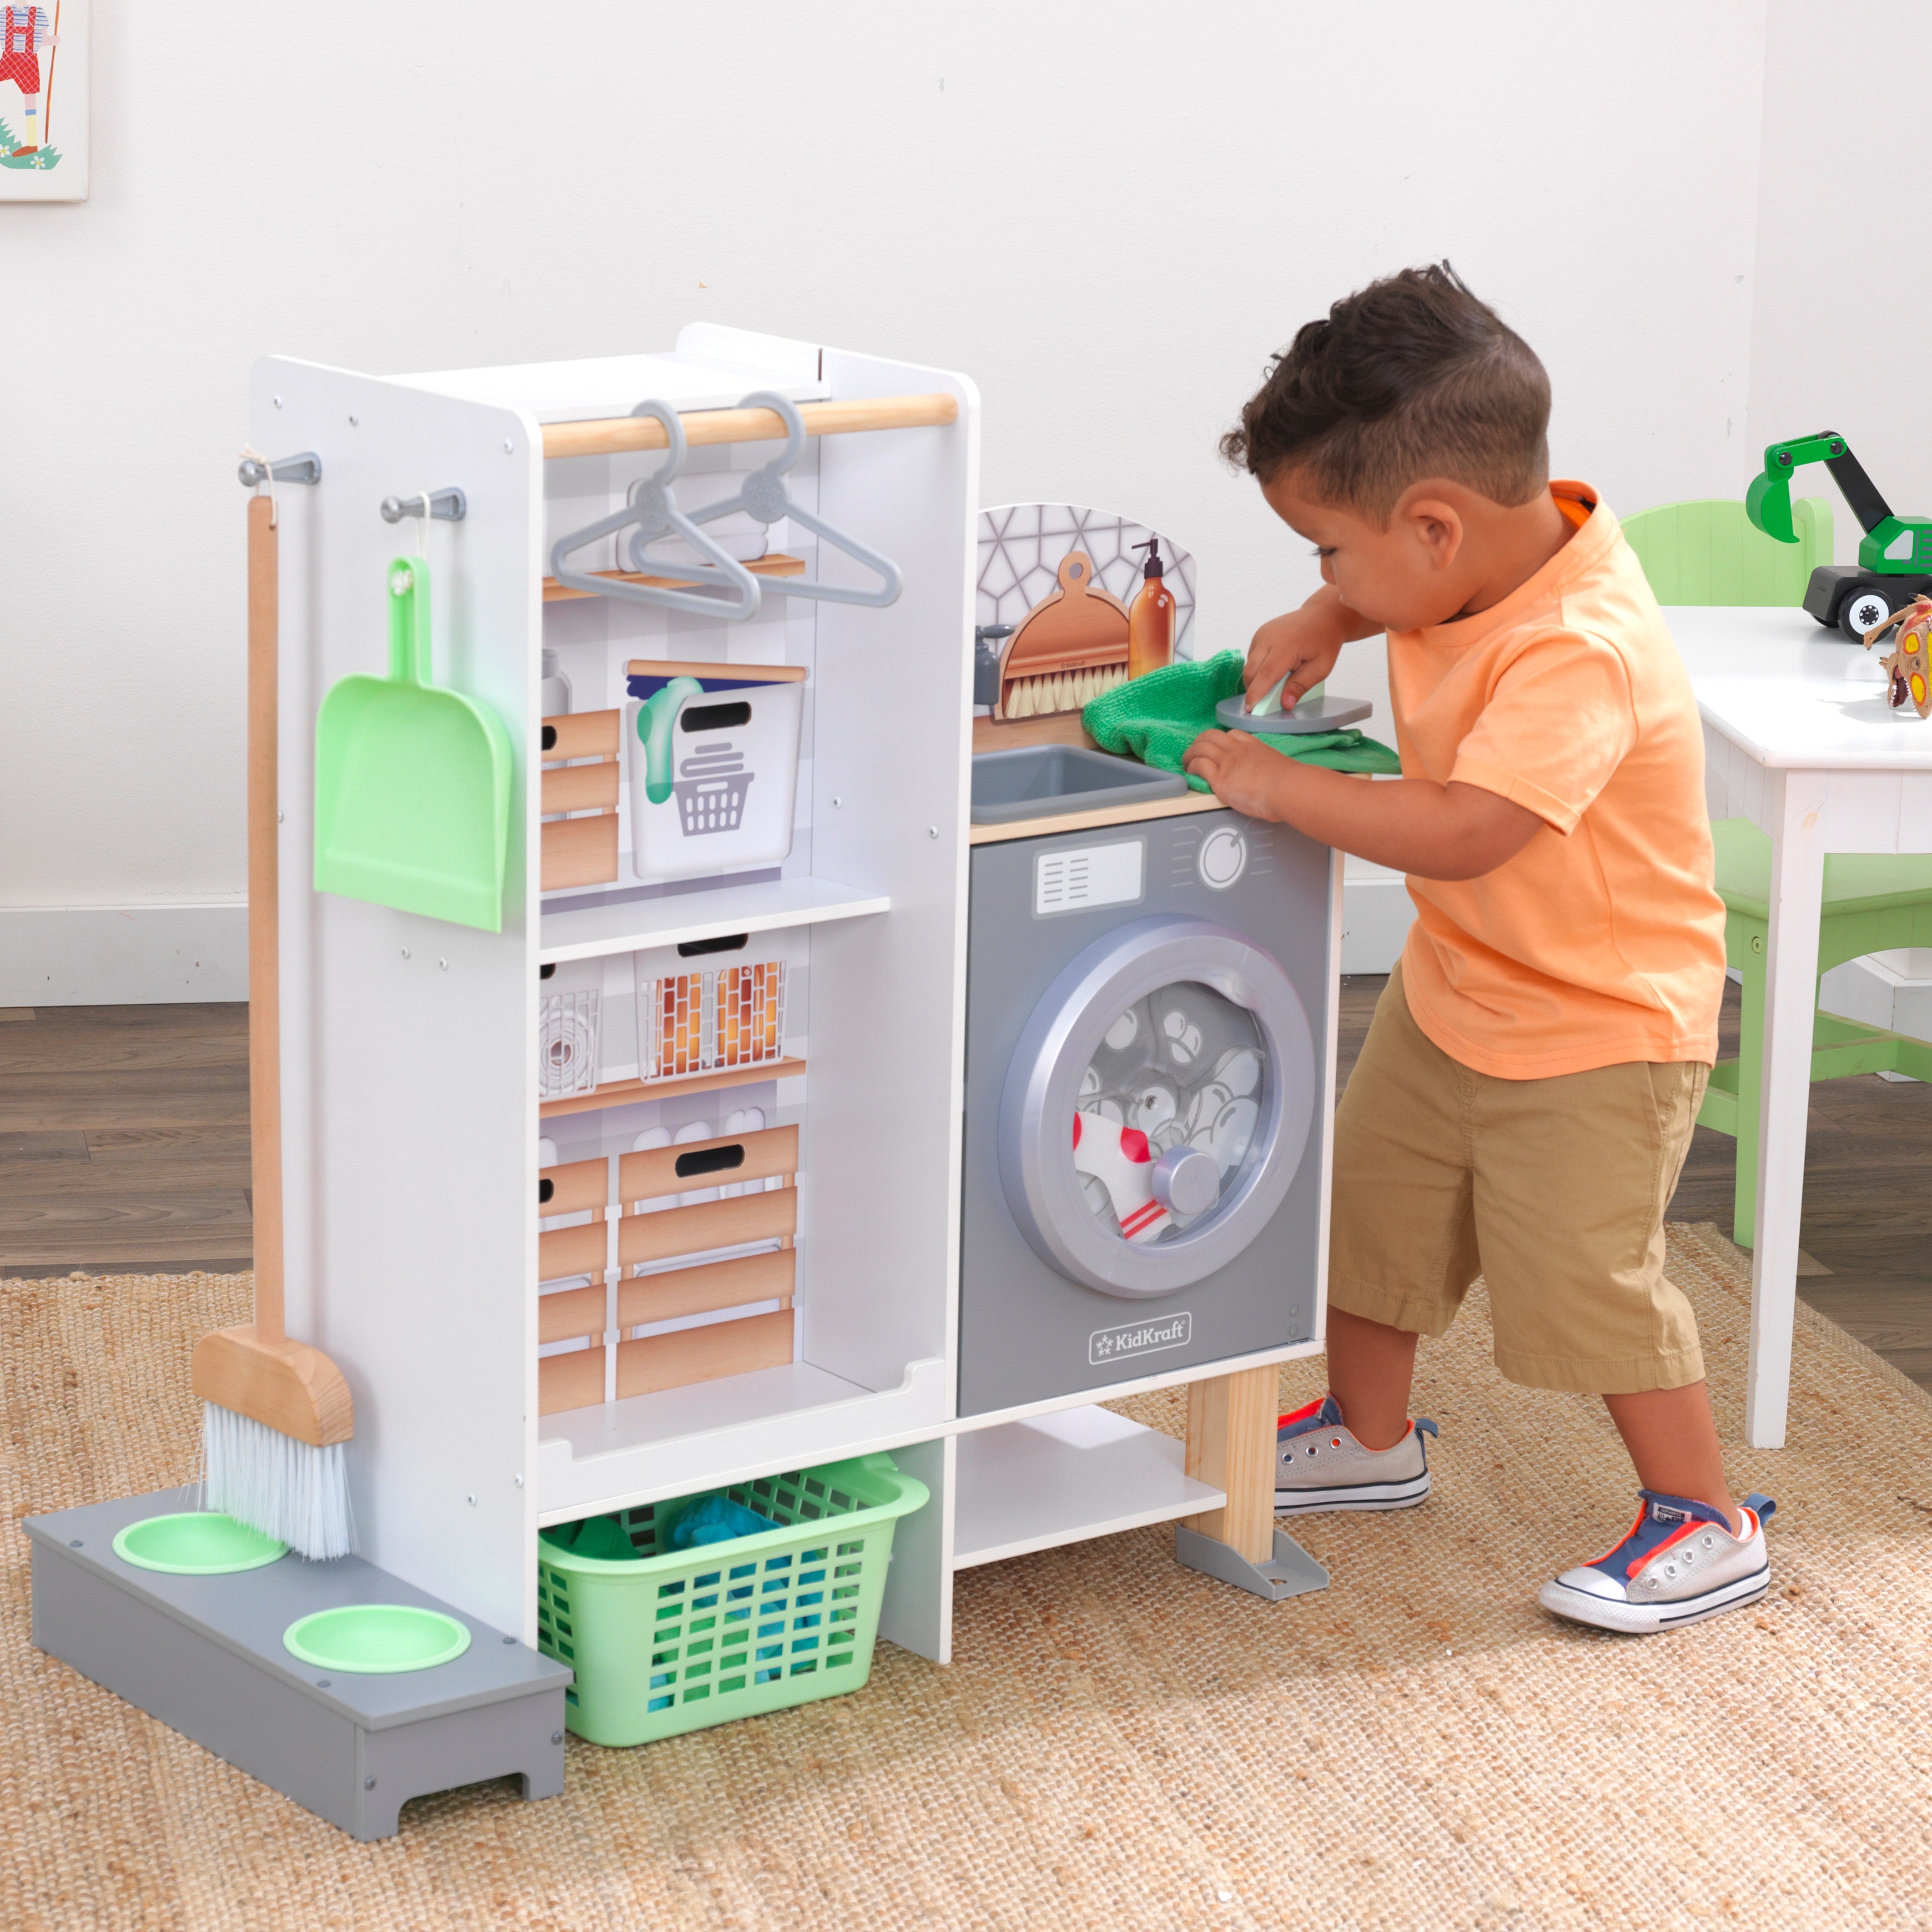 Kid playing with KidKraft play kitchen